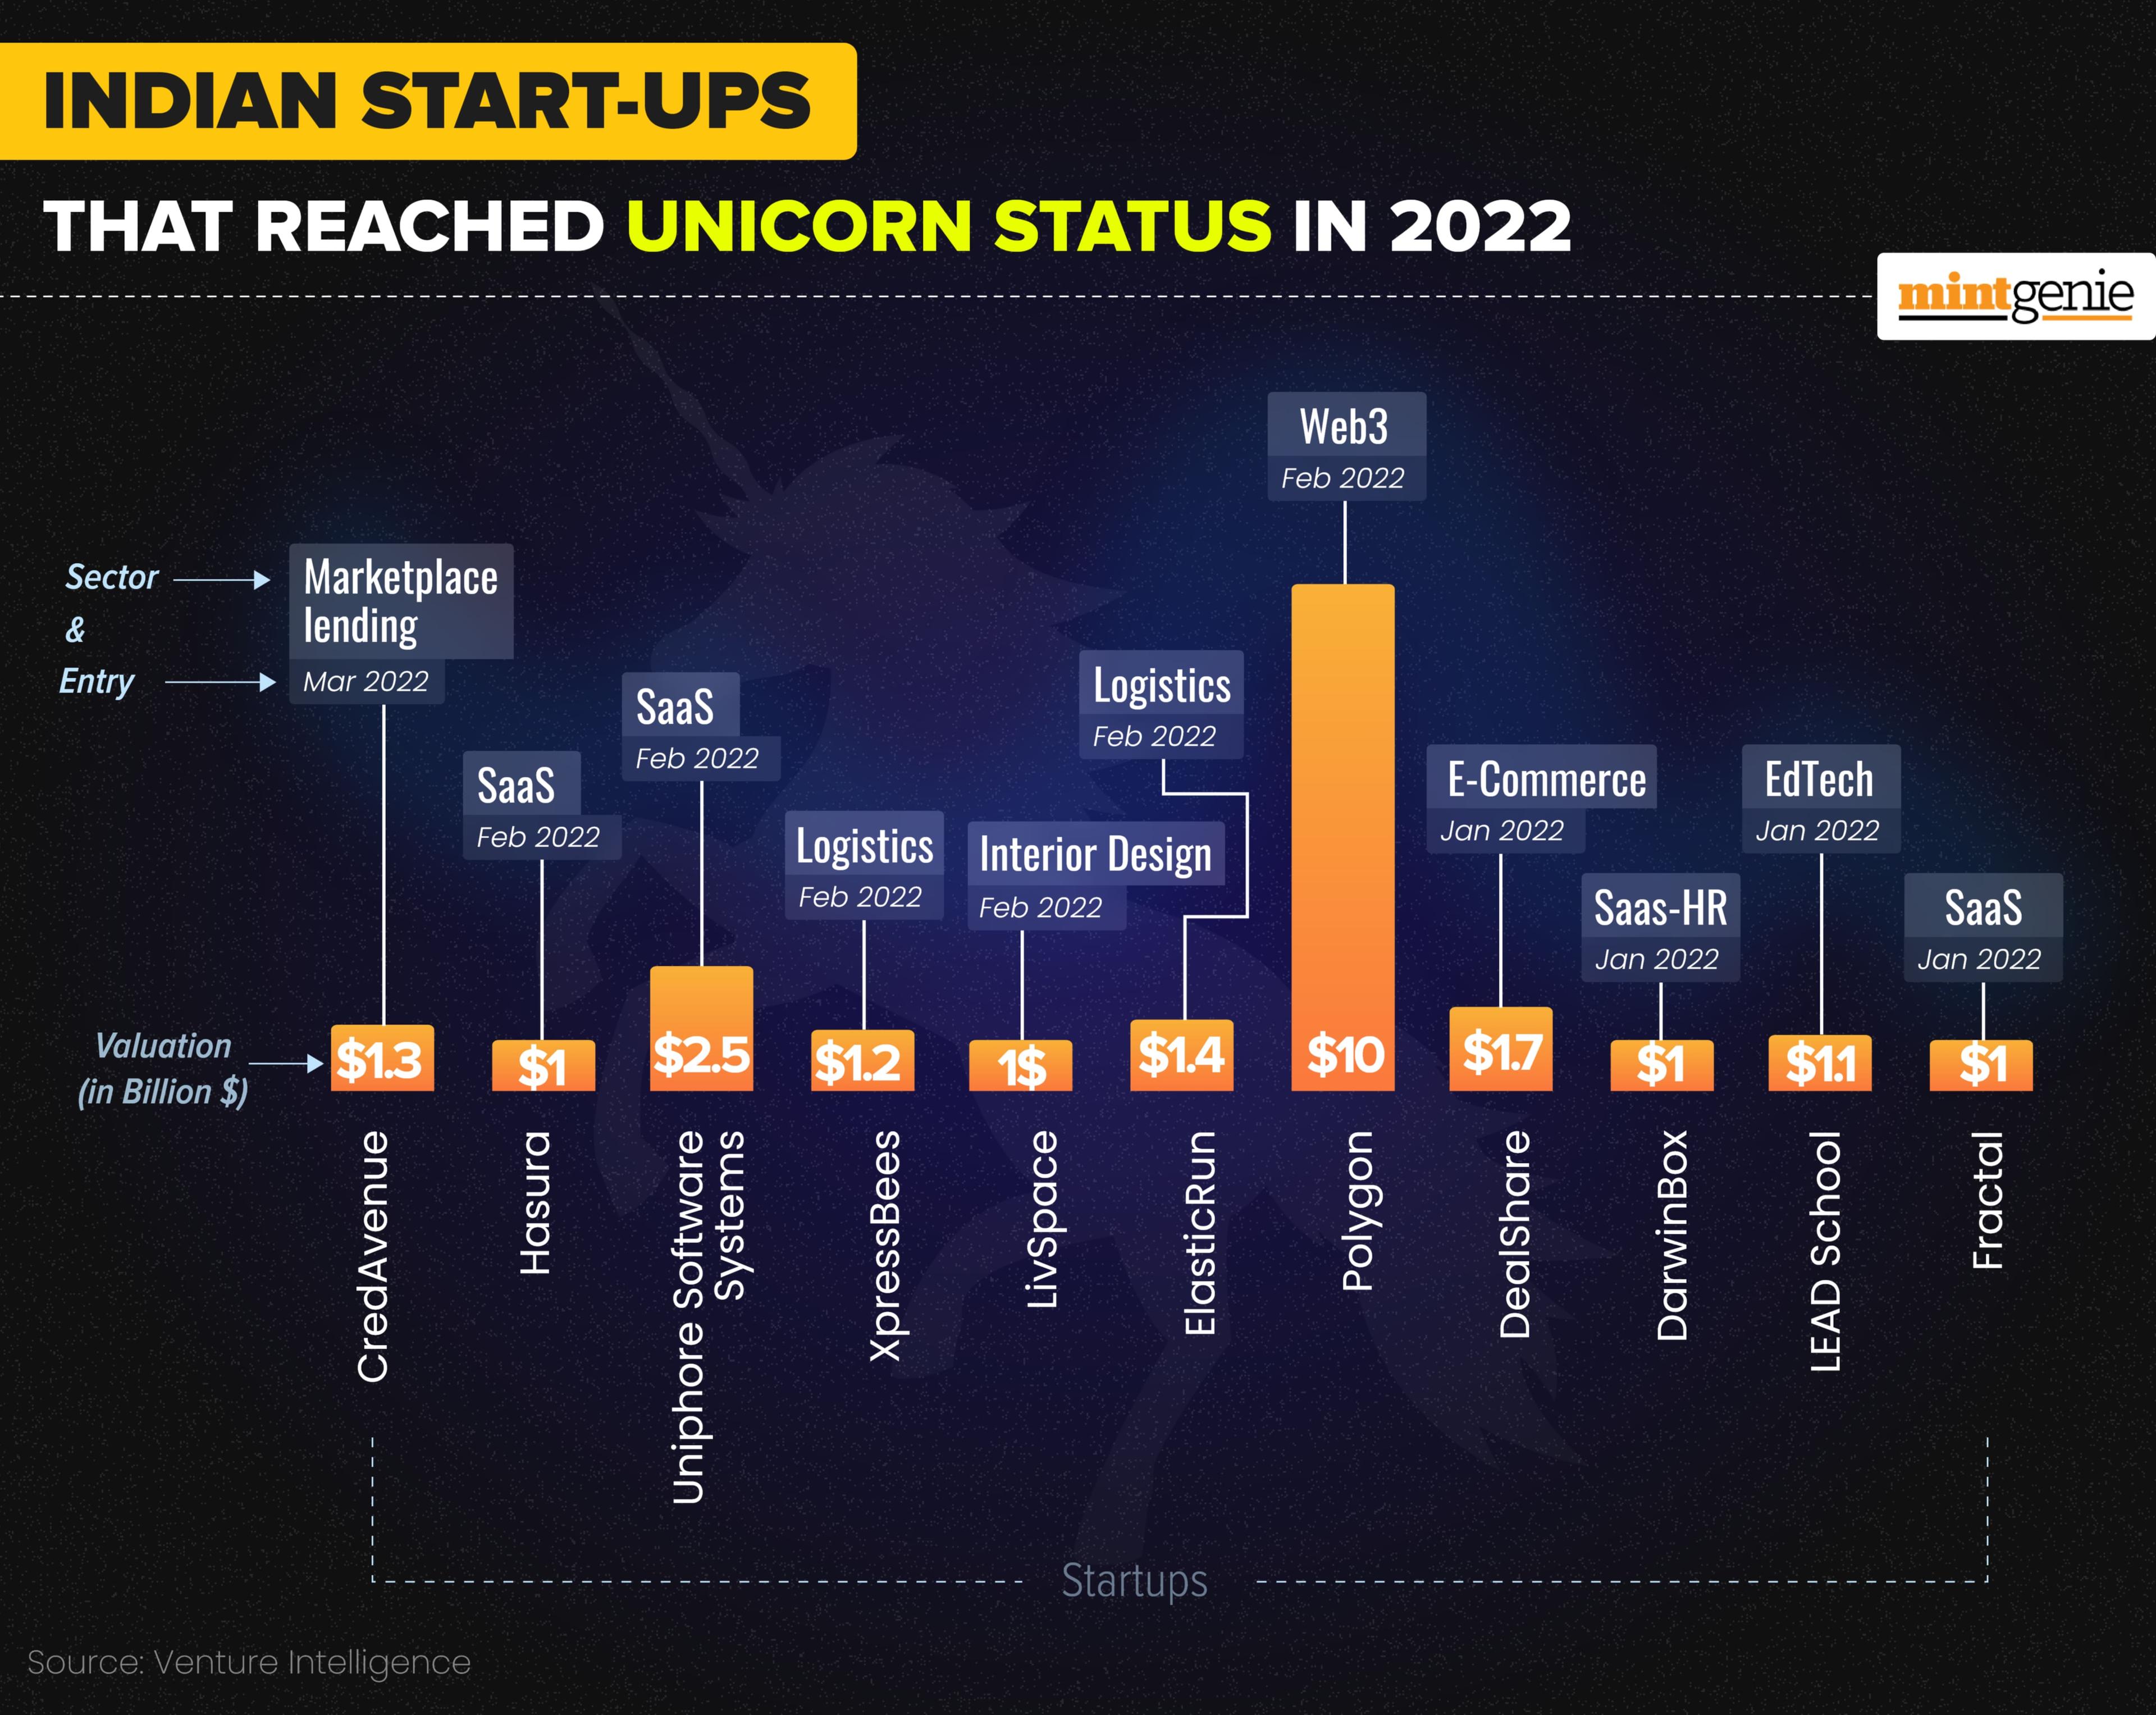 These are the Indian start-ups that acquired the unicorn status in 2022.